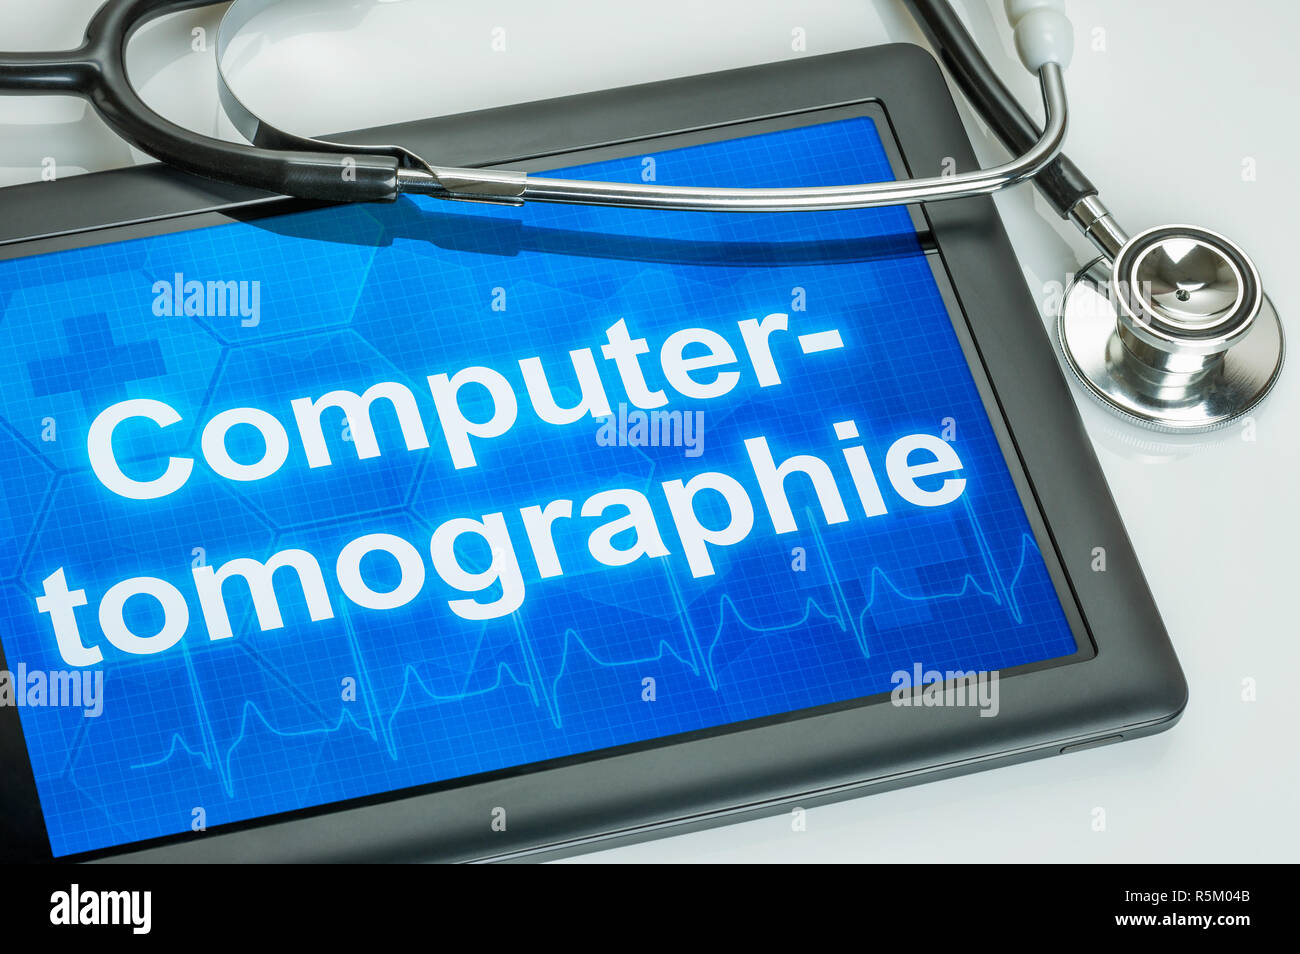 tablet with the text computer tomography on the display Stock Photo